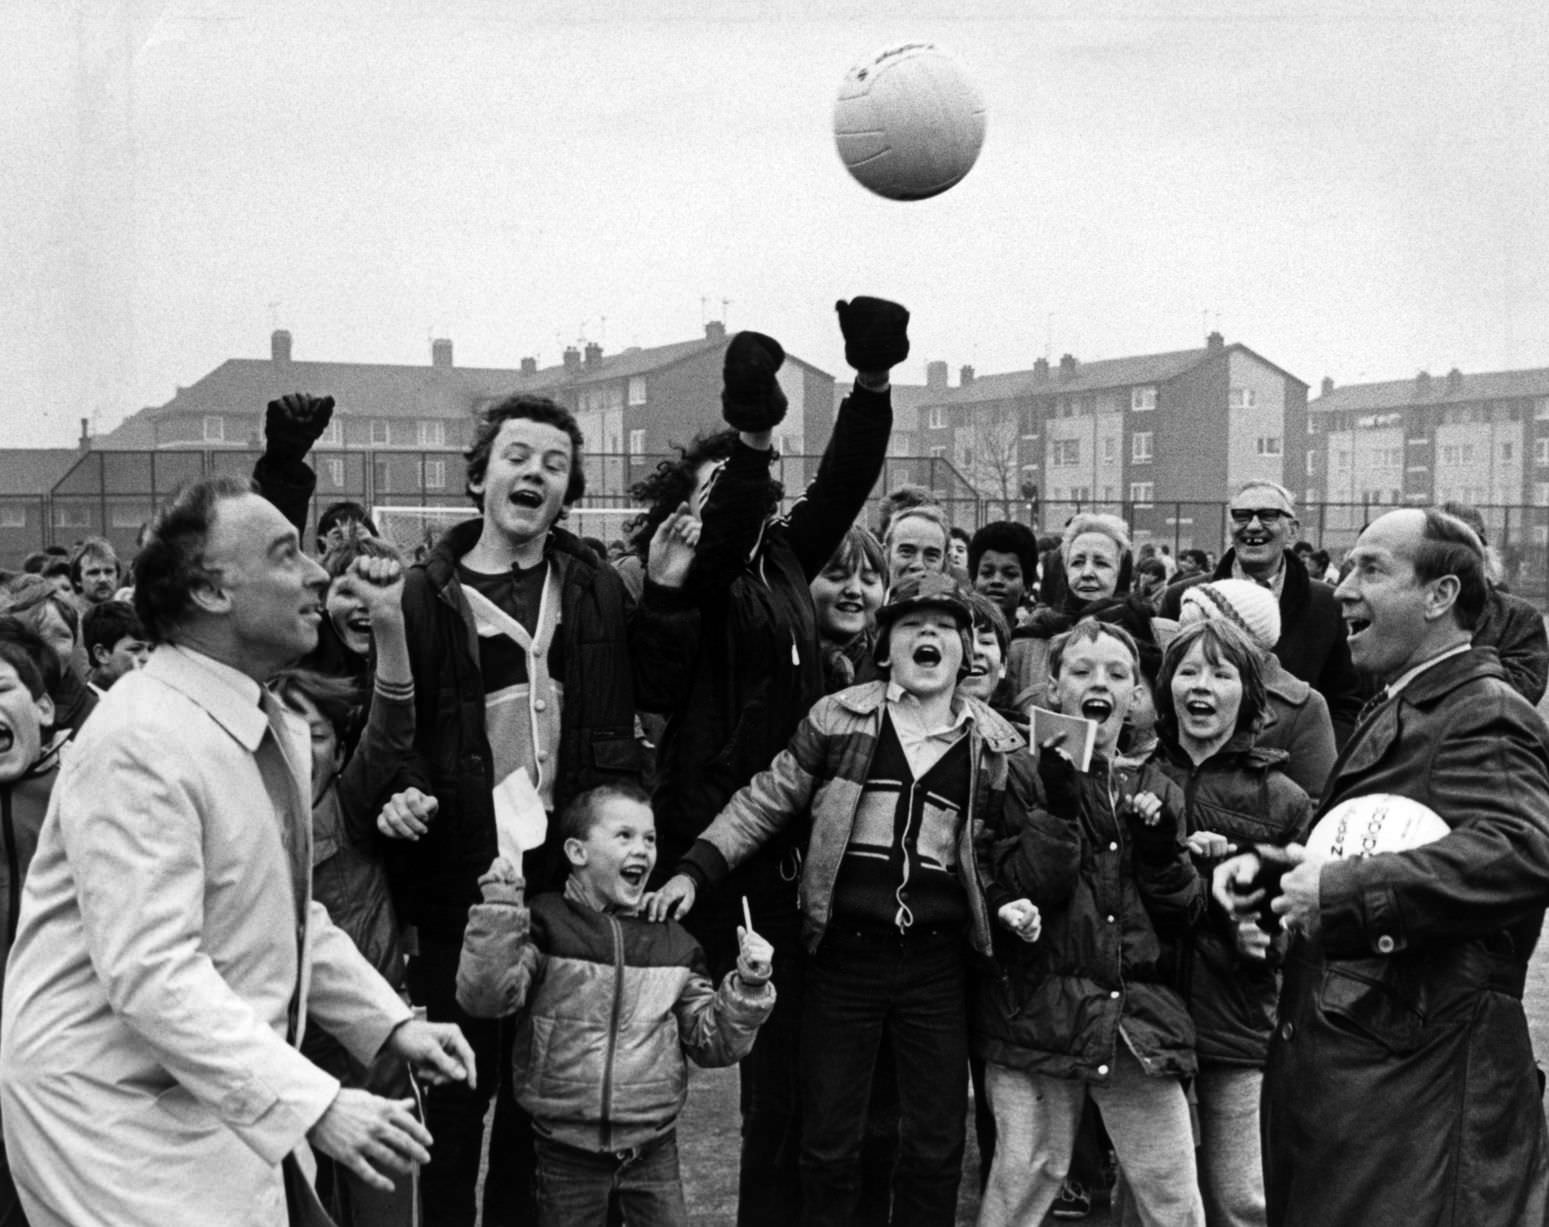 A head start for the new all-weather pitch as Sports Minister Neil MacFarlane (left) and Bobby Charlton give the youngsters in Toxteth something to cheer about. 24th February 1983